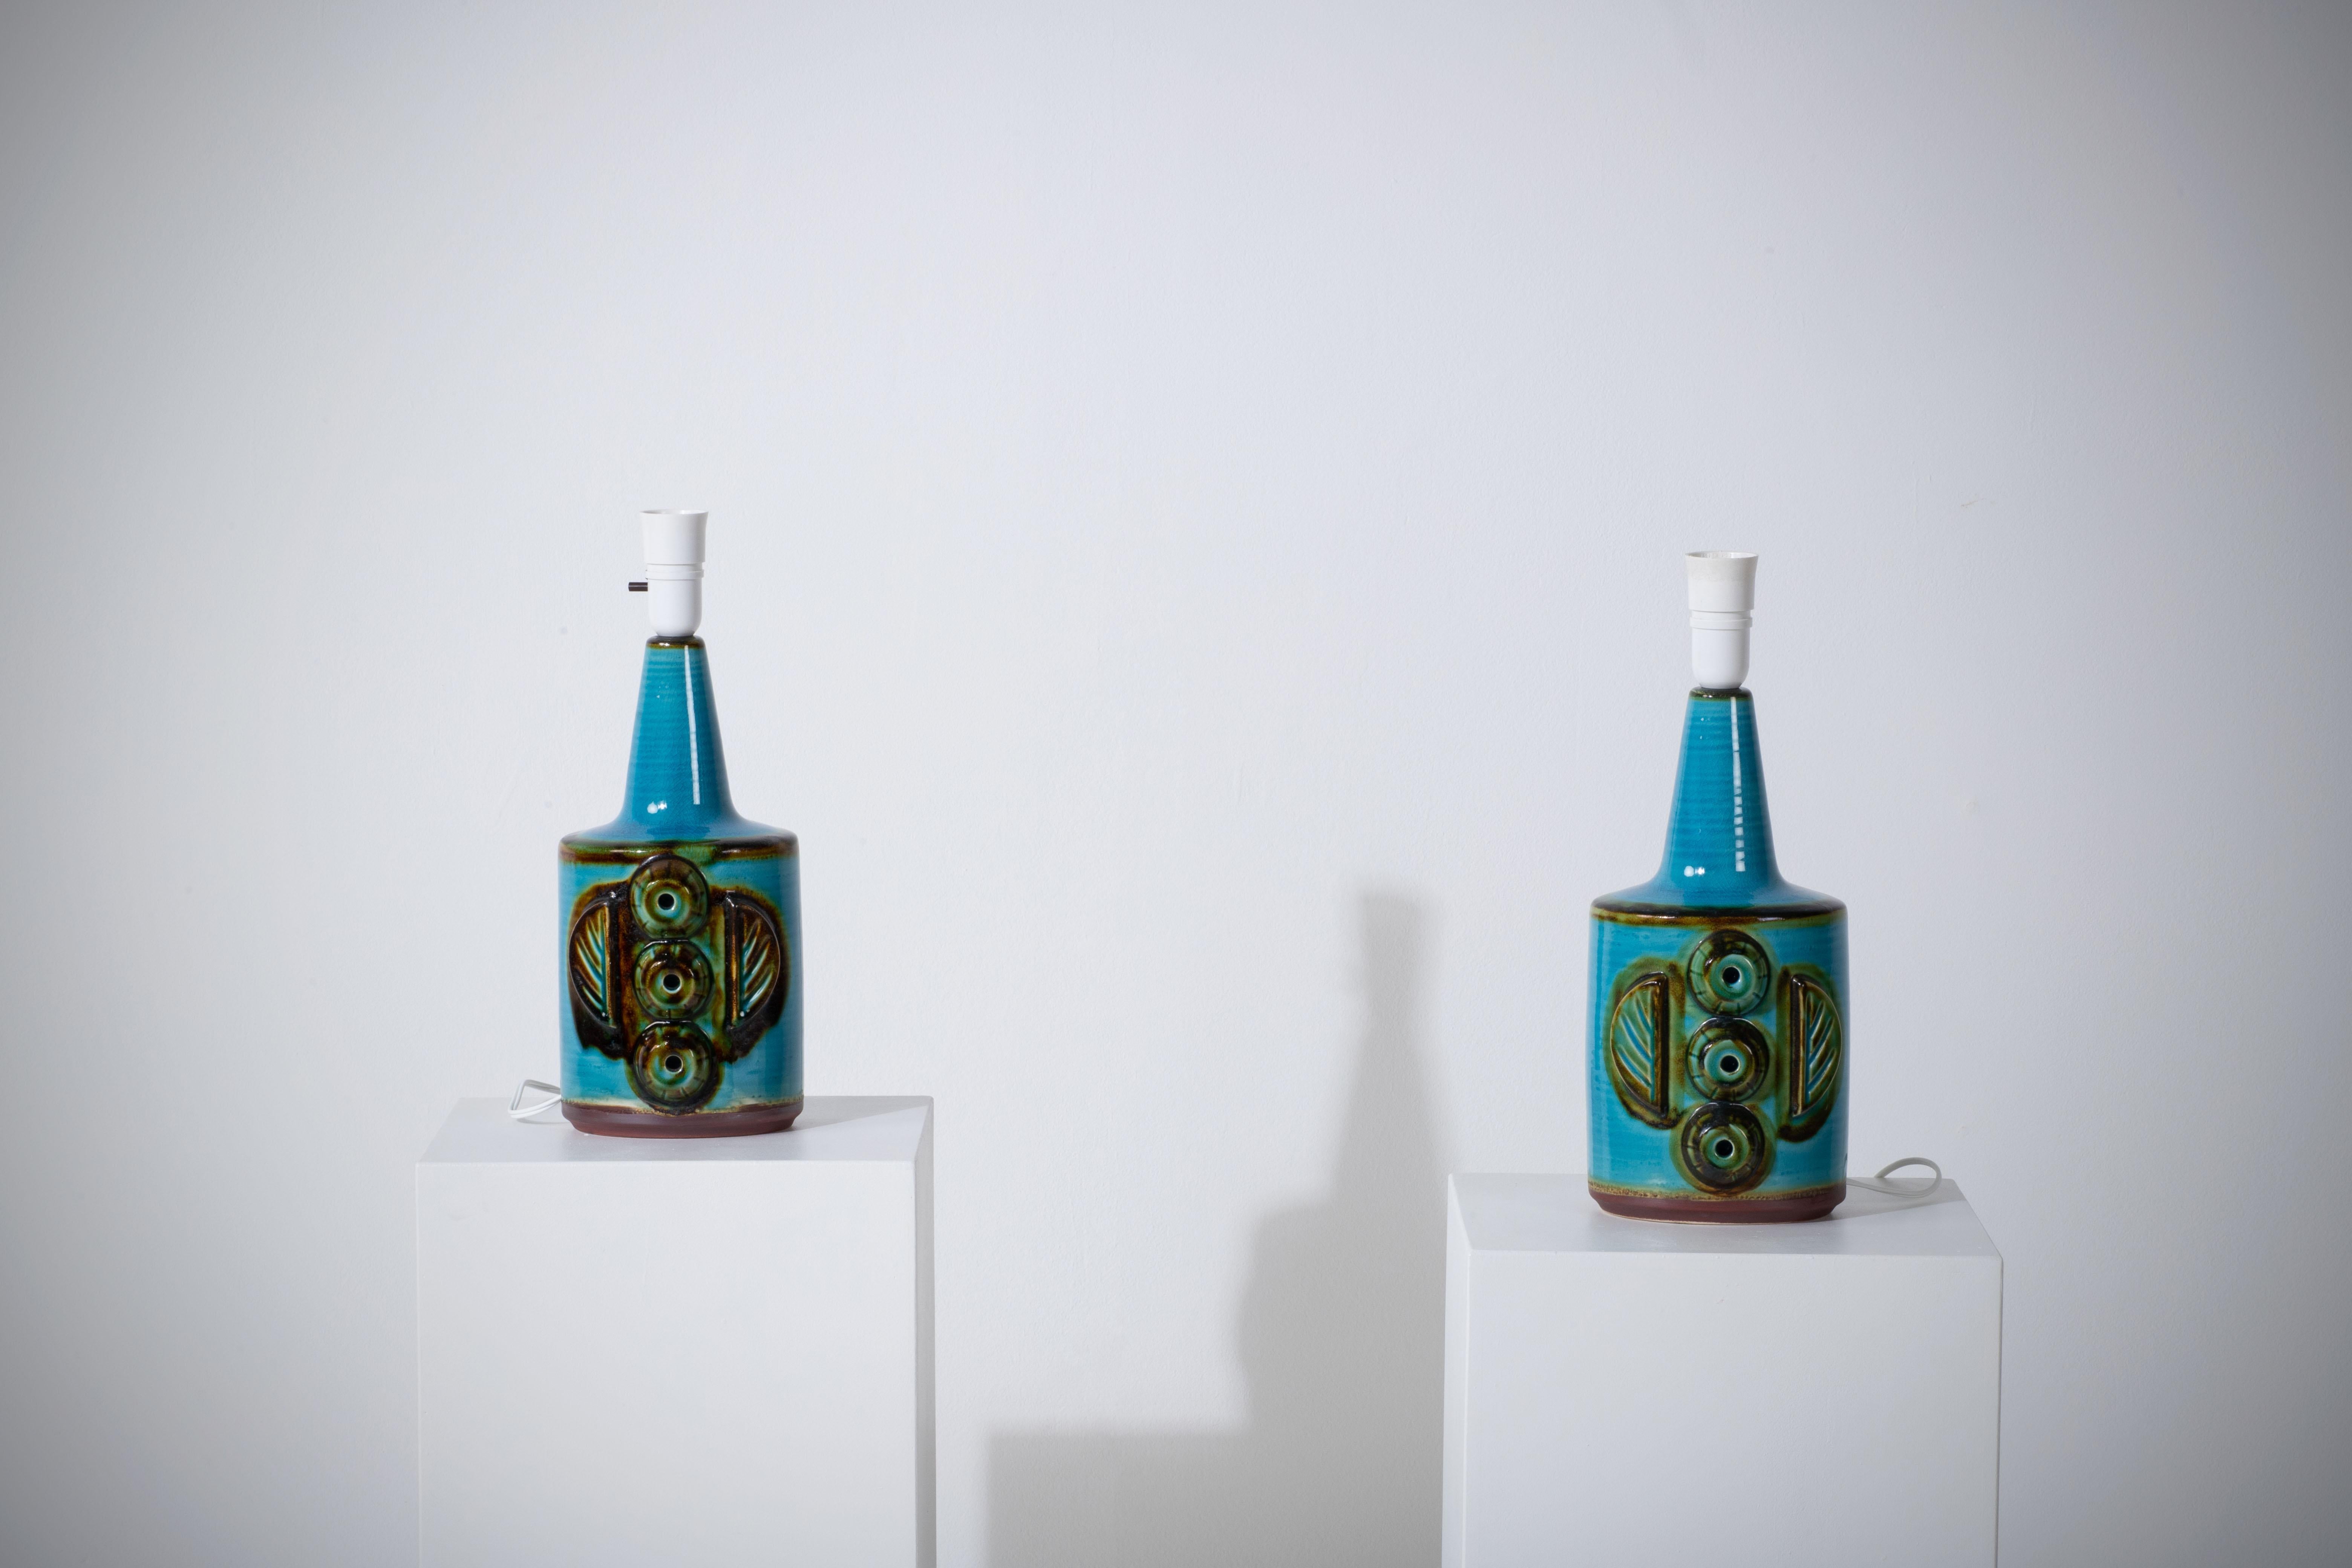 Pair of Turquoise Søholm Table Lamps by Einar Johansen, Denmark, 1960s For Sale 4